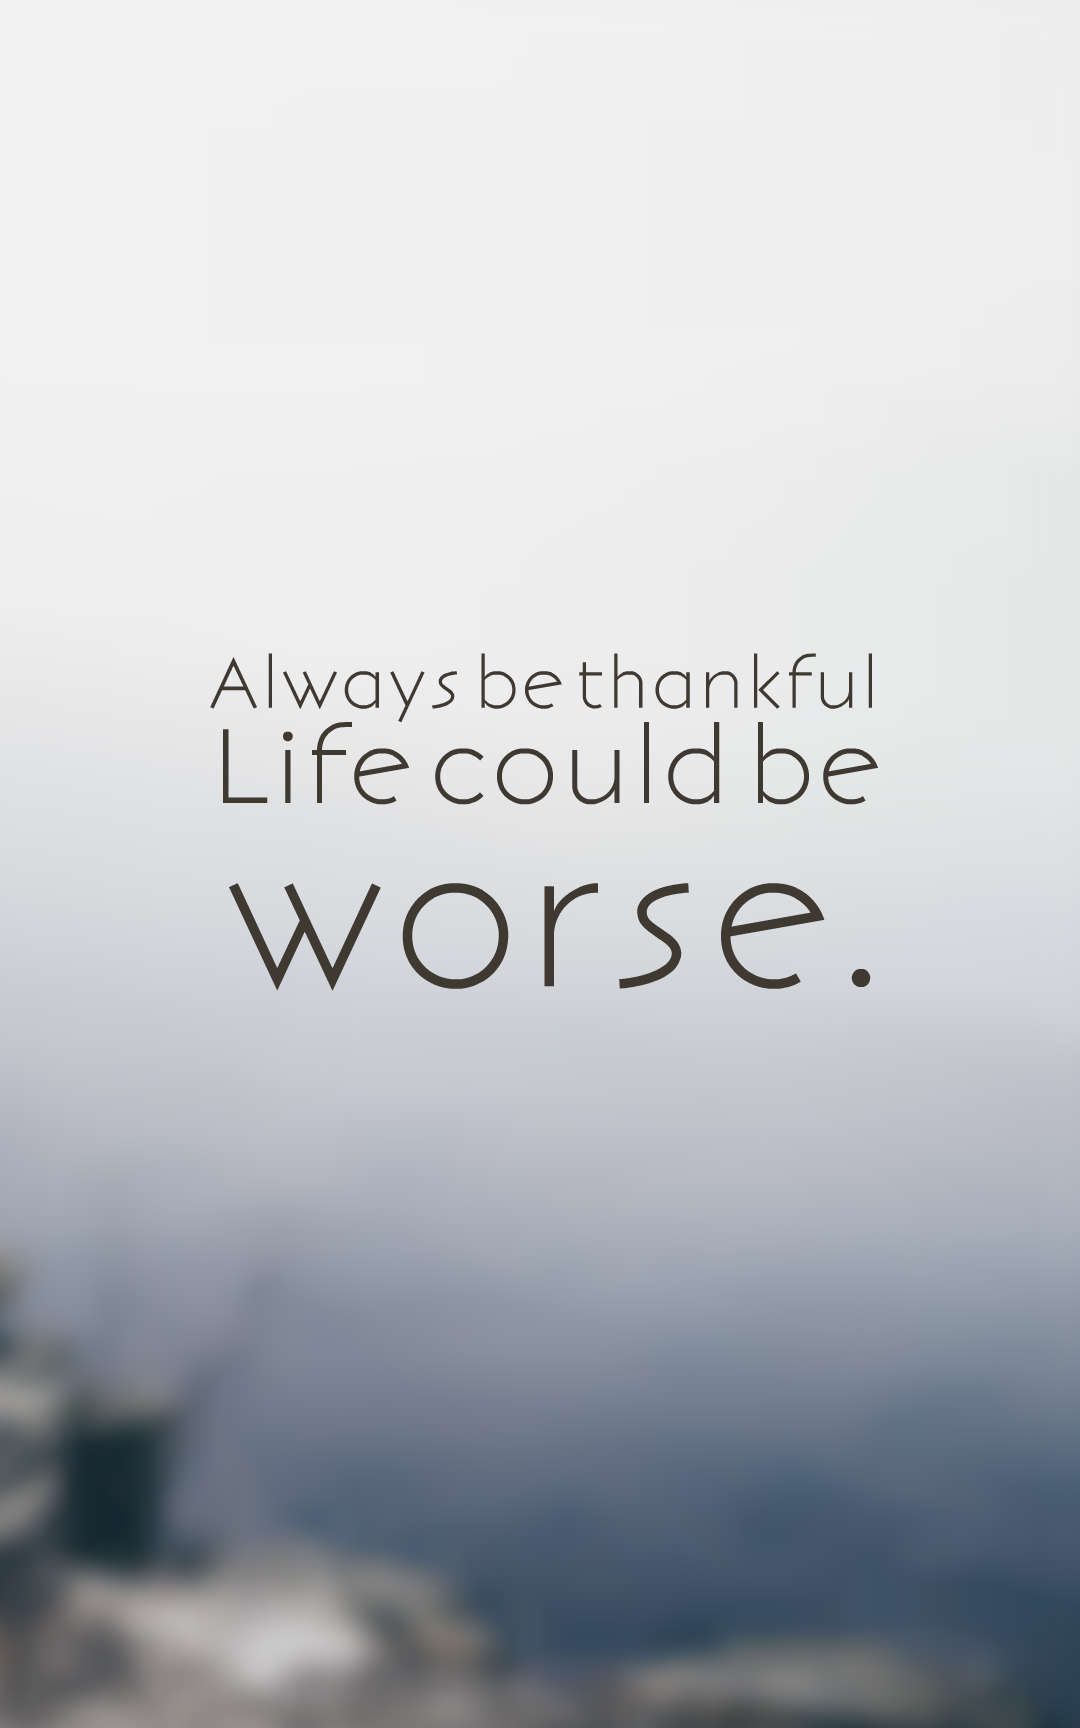 Always be thankful Life could be worse.